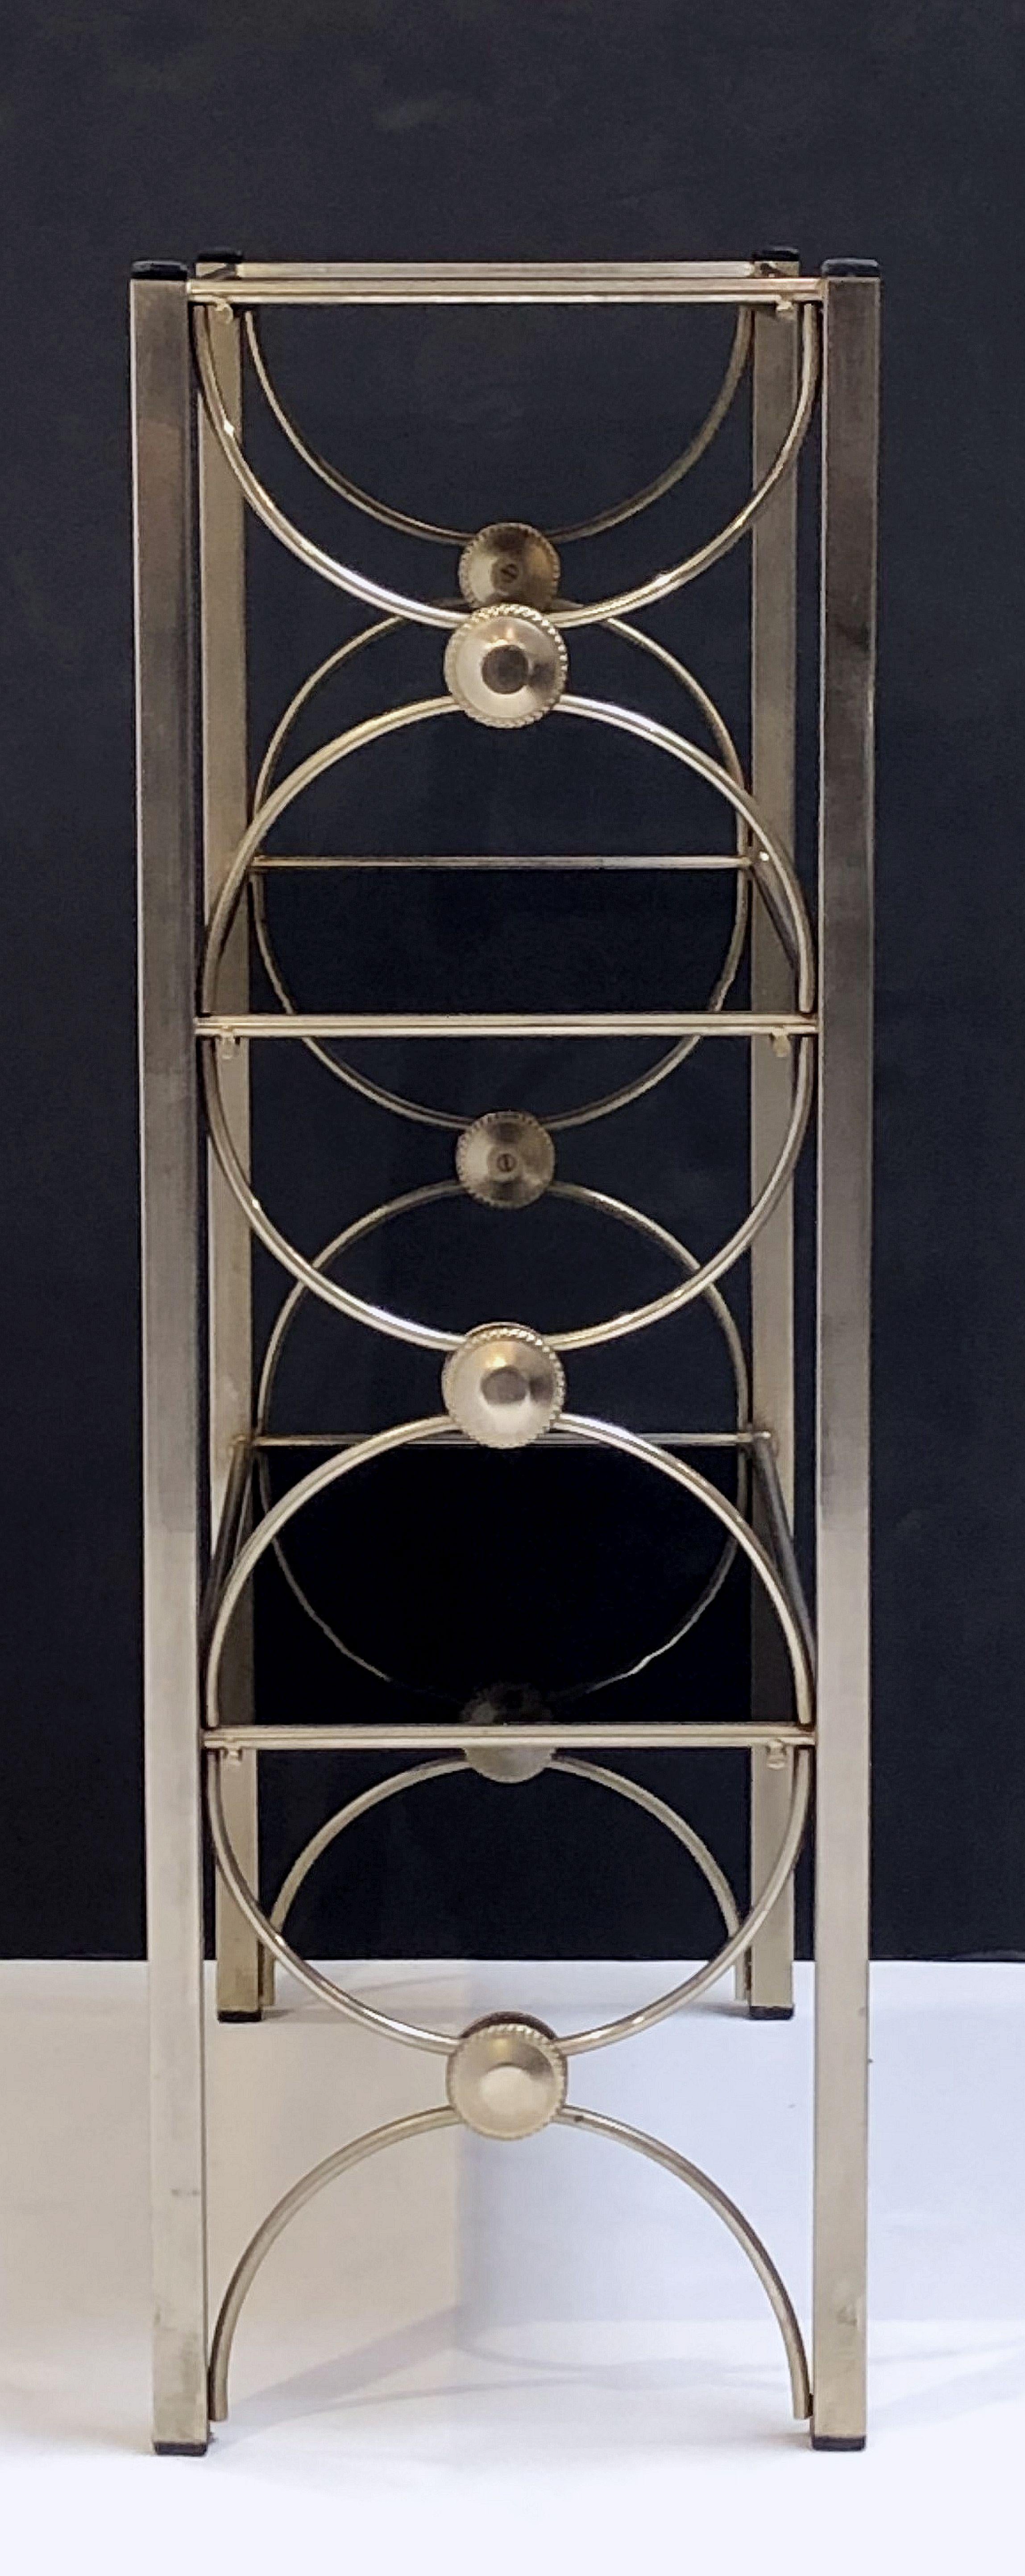 Brushed Three-Tiered Shelves or Étagère of Metal and Black Glass